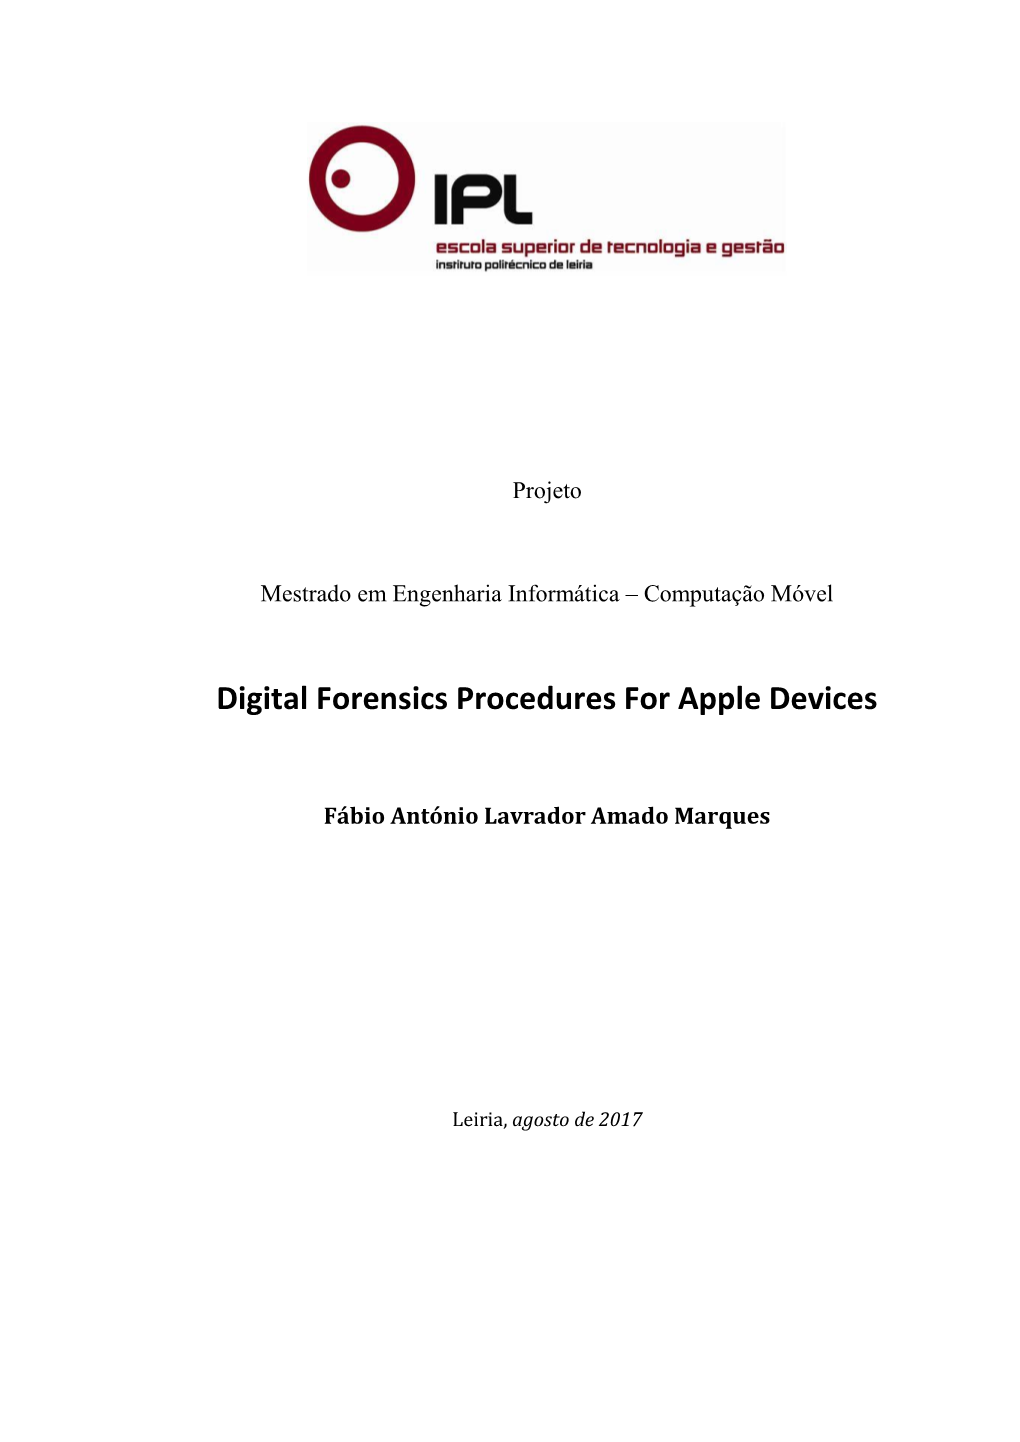 Digital Forensics Procedures for Apple Devices